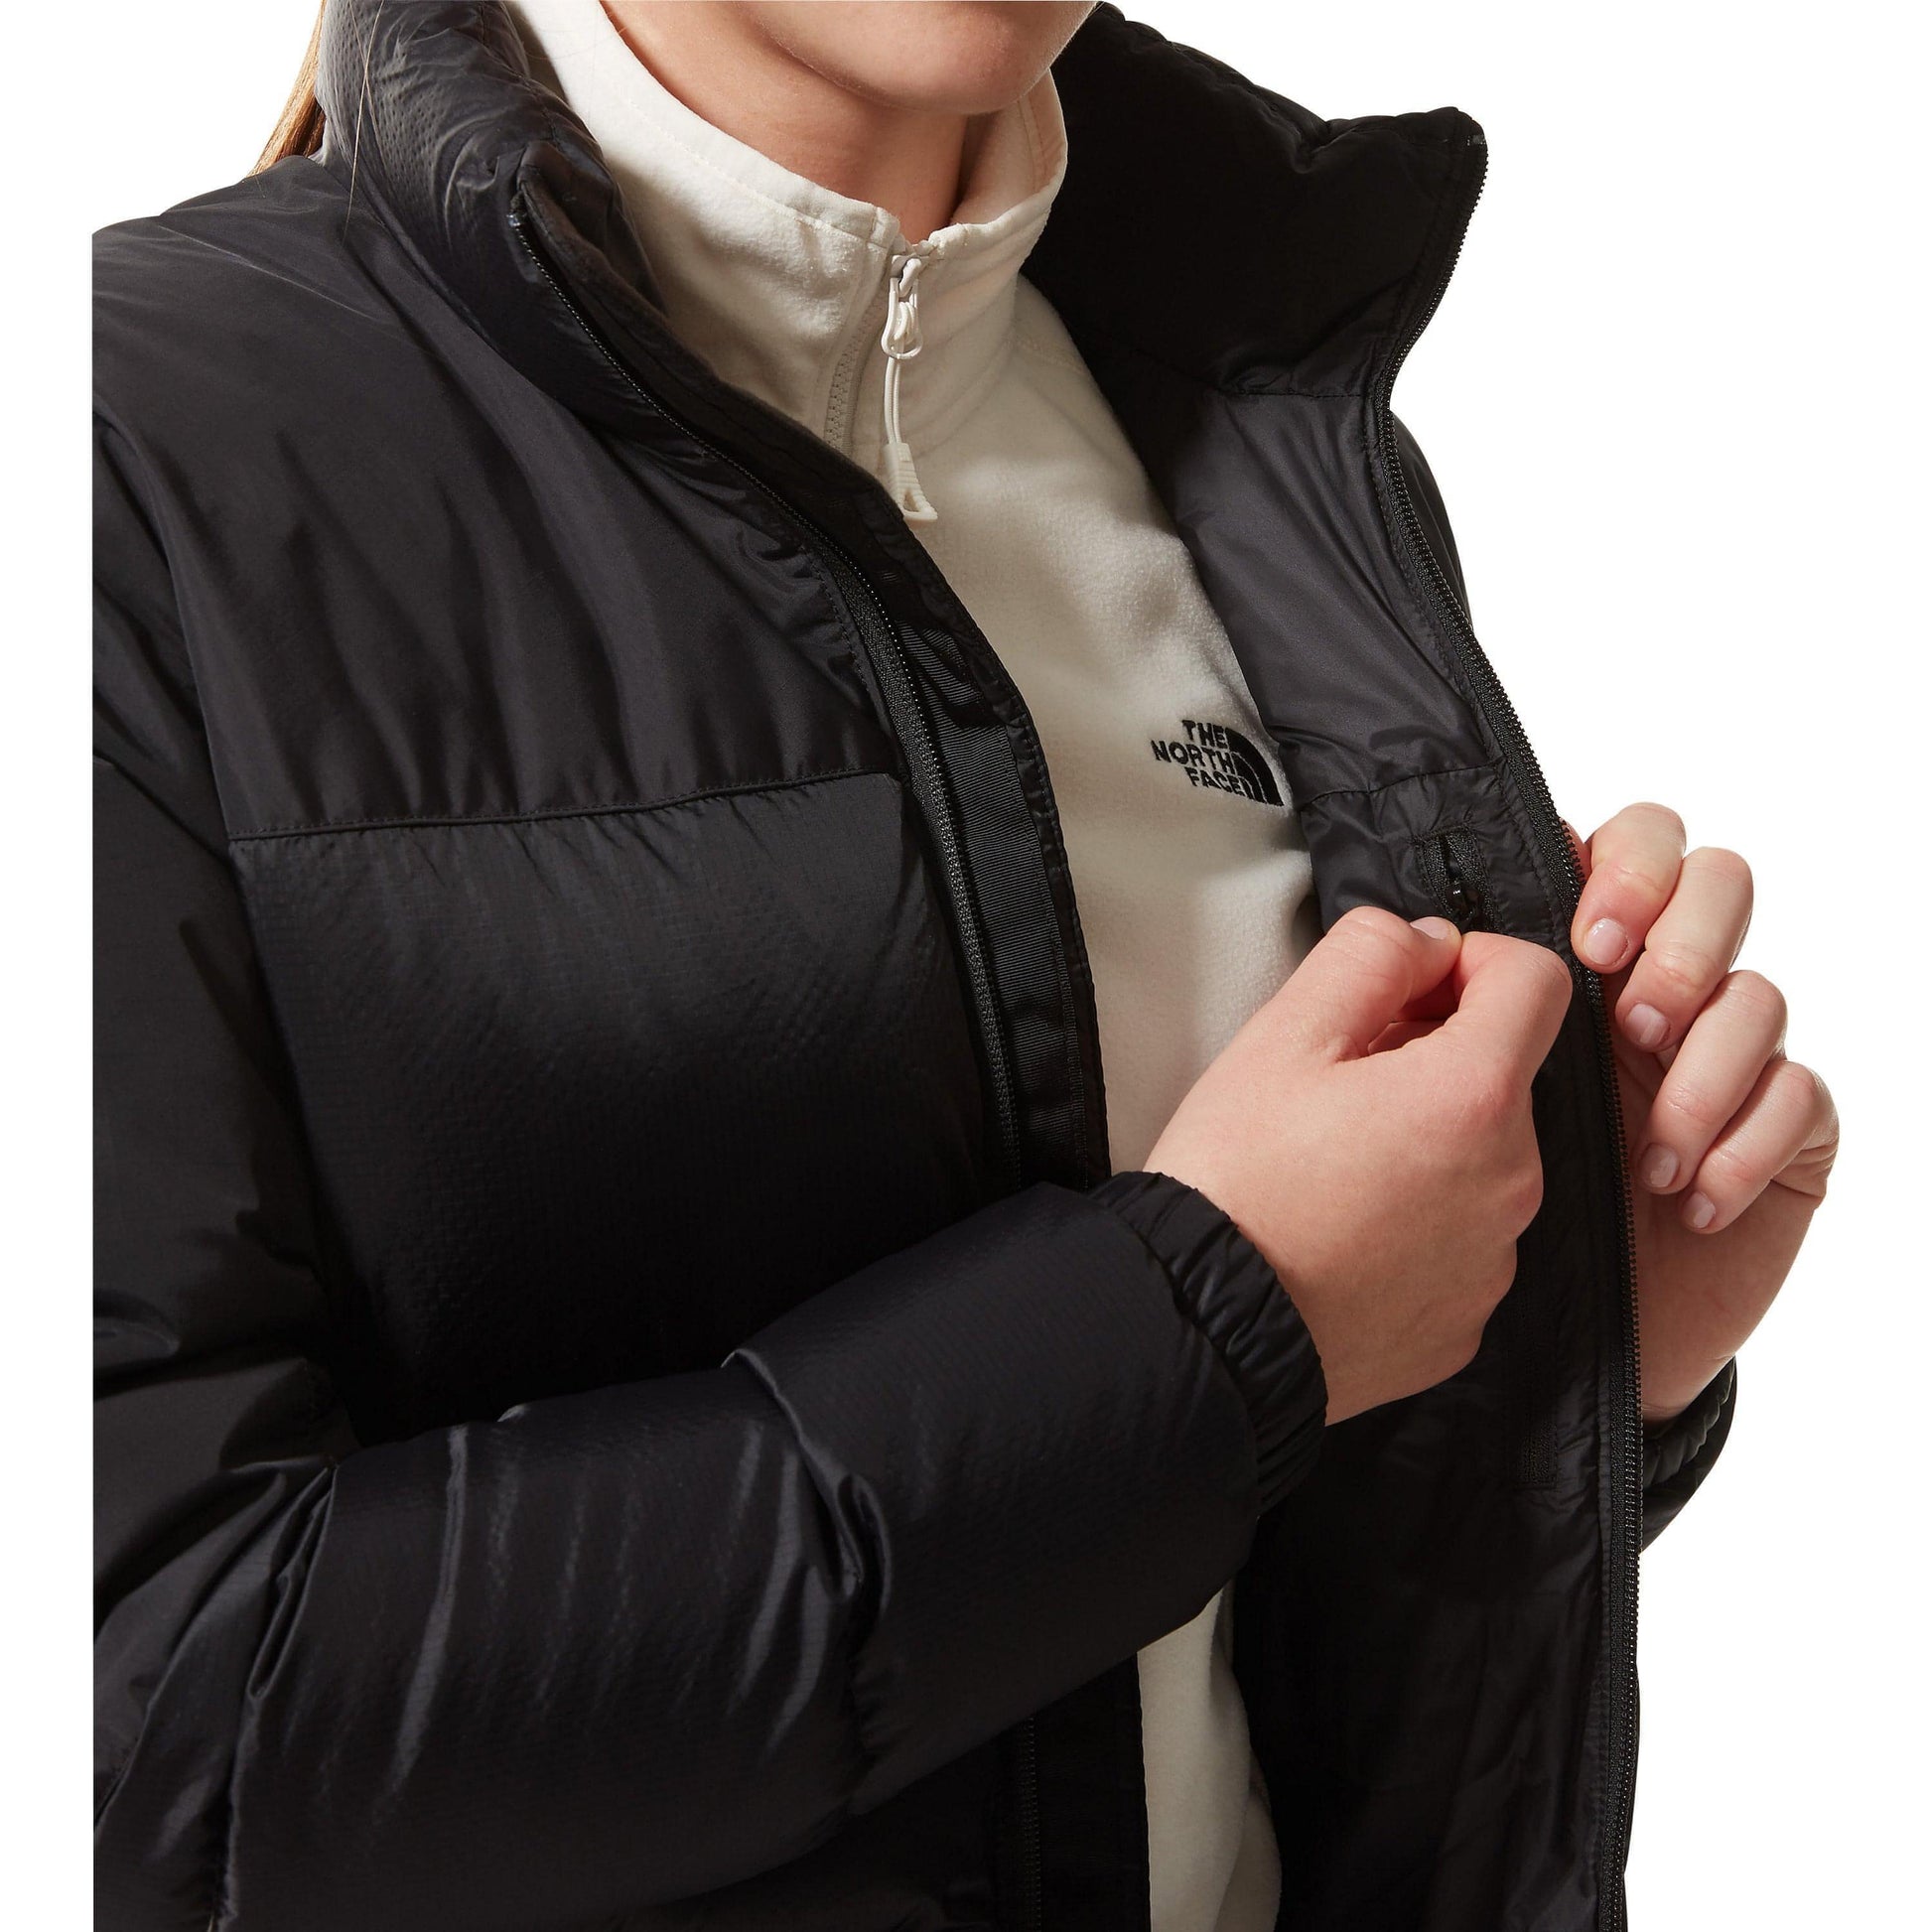 Thenorth Face Diablo Womens Down Jacket Nf0A4Svkkx71 Details